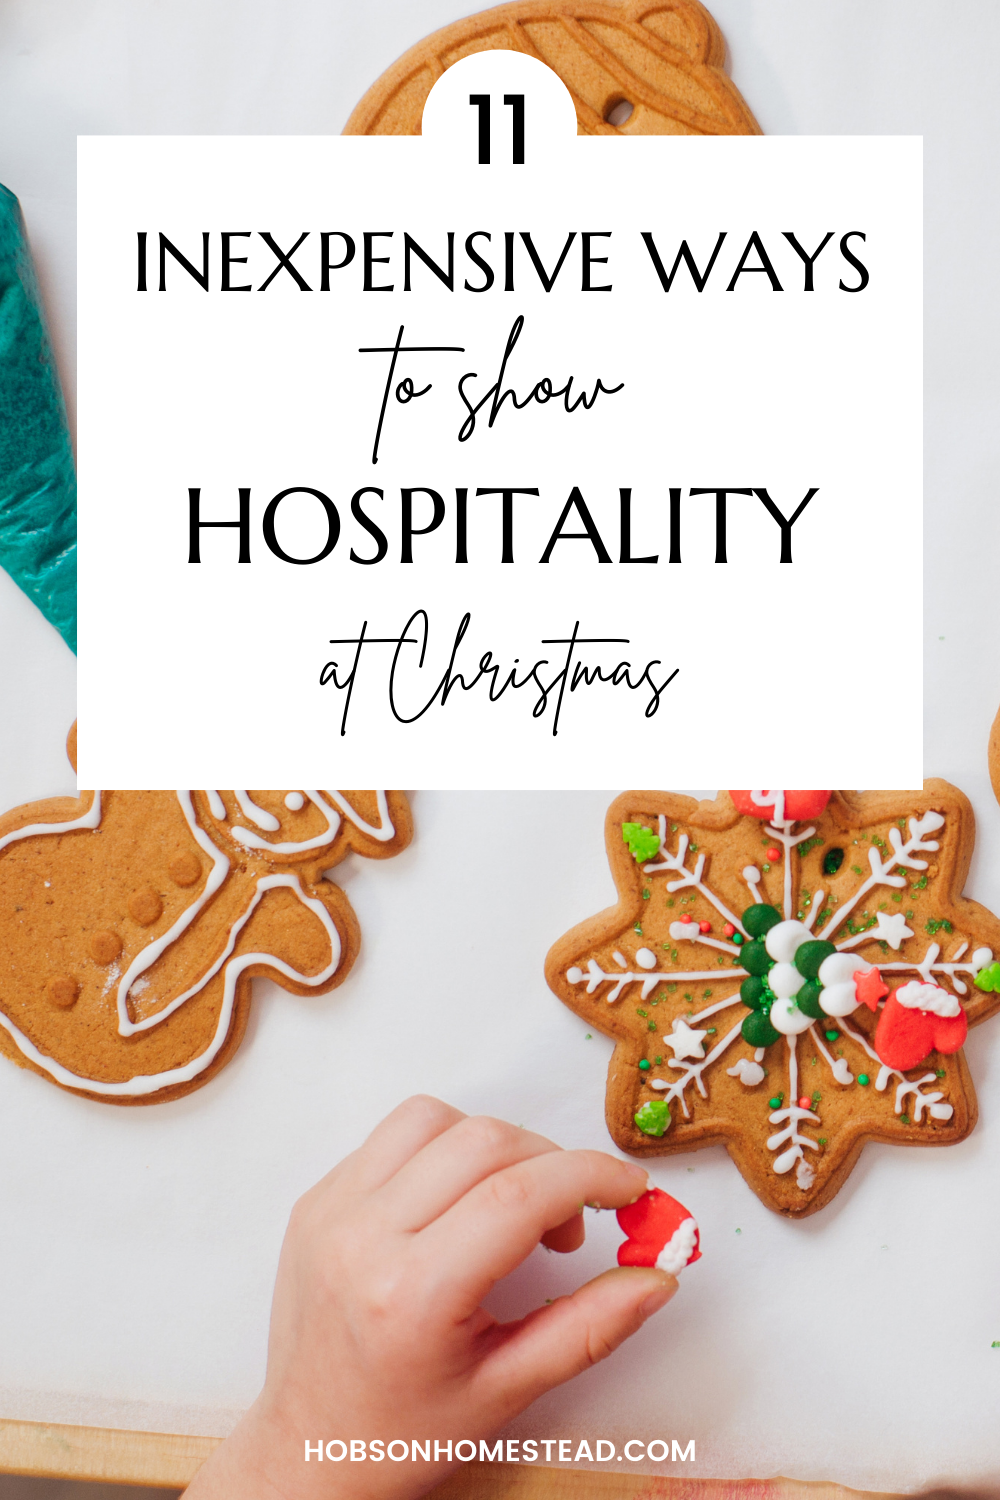 11 Inexpensive Ways to Show Biblical Hospitality at Christmas